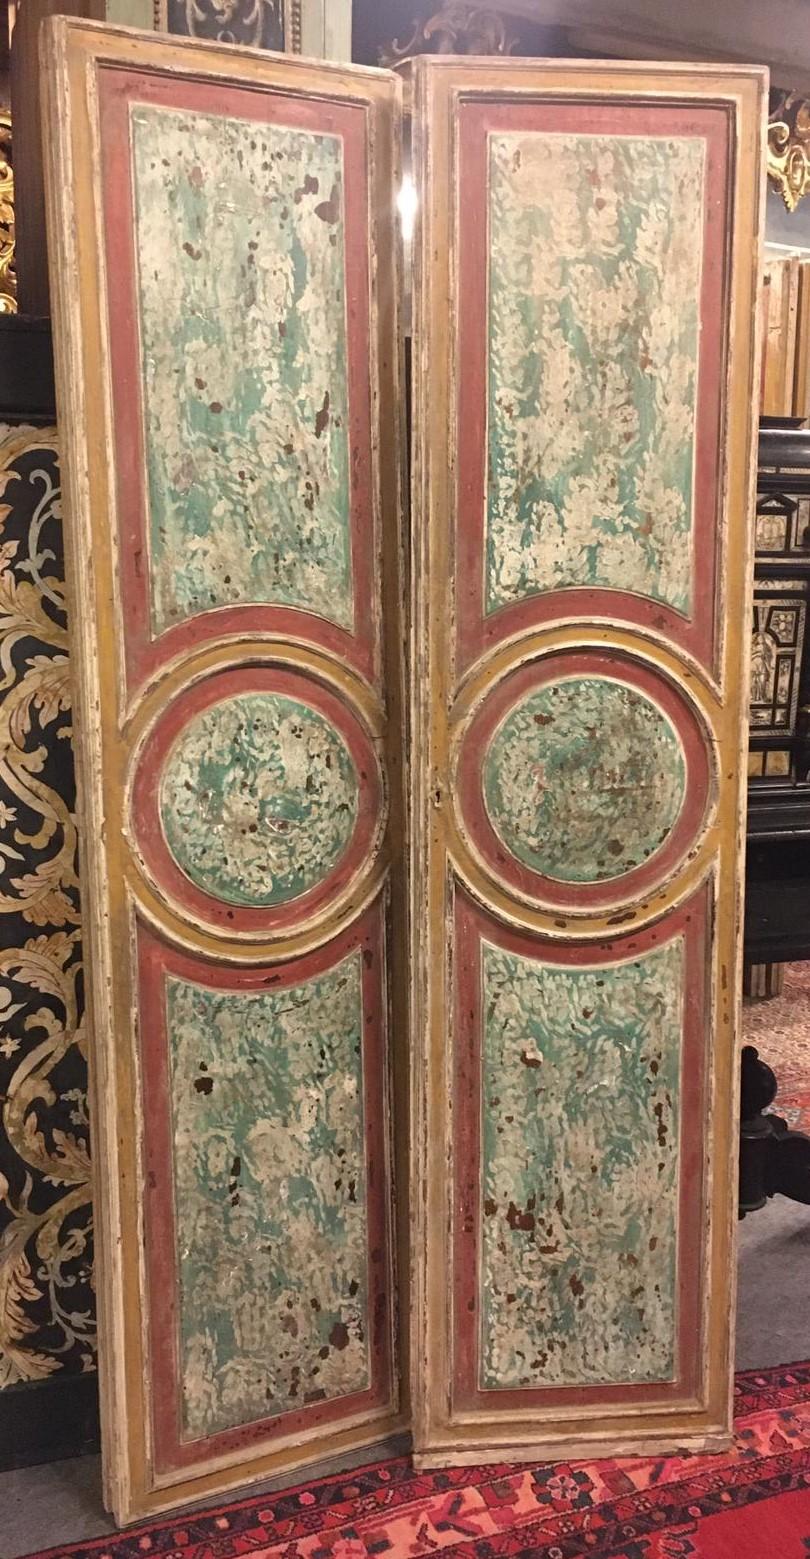 set of N. 2 double-leaf doors lacquered with a faux marble effect, colored and carved, double-sided, carved and lacquered also on the back, hand-built in the 18th century, from Rome, measuring cm W 100 x H 210.
Also very beautiful and usable as